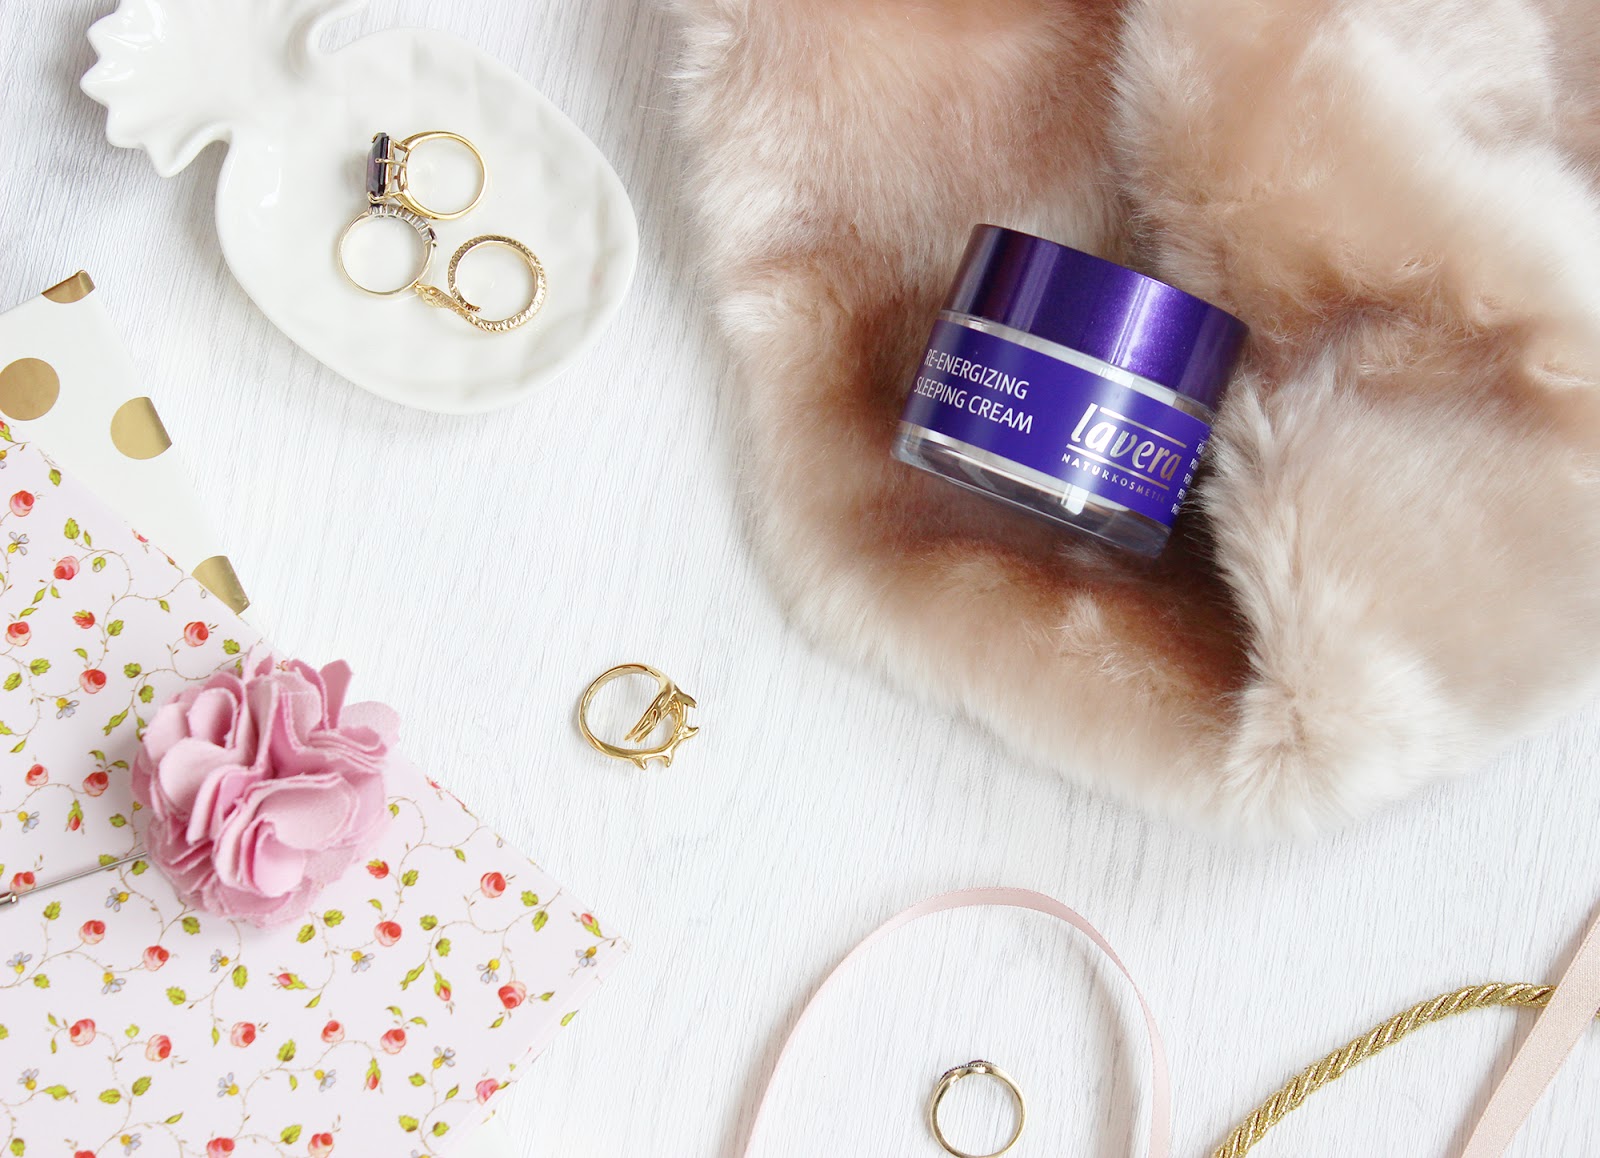 Lavera Re-energising Sleeping Cream review and giveaway